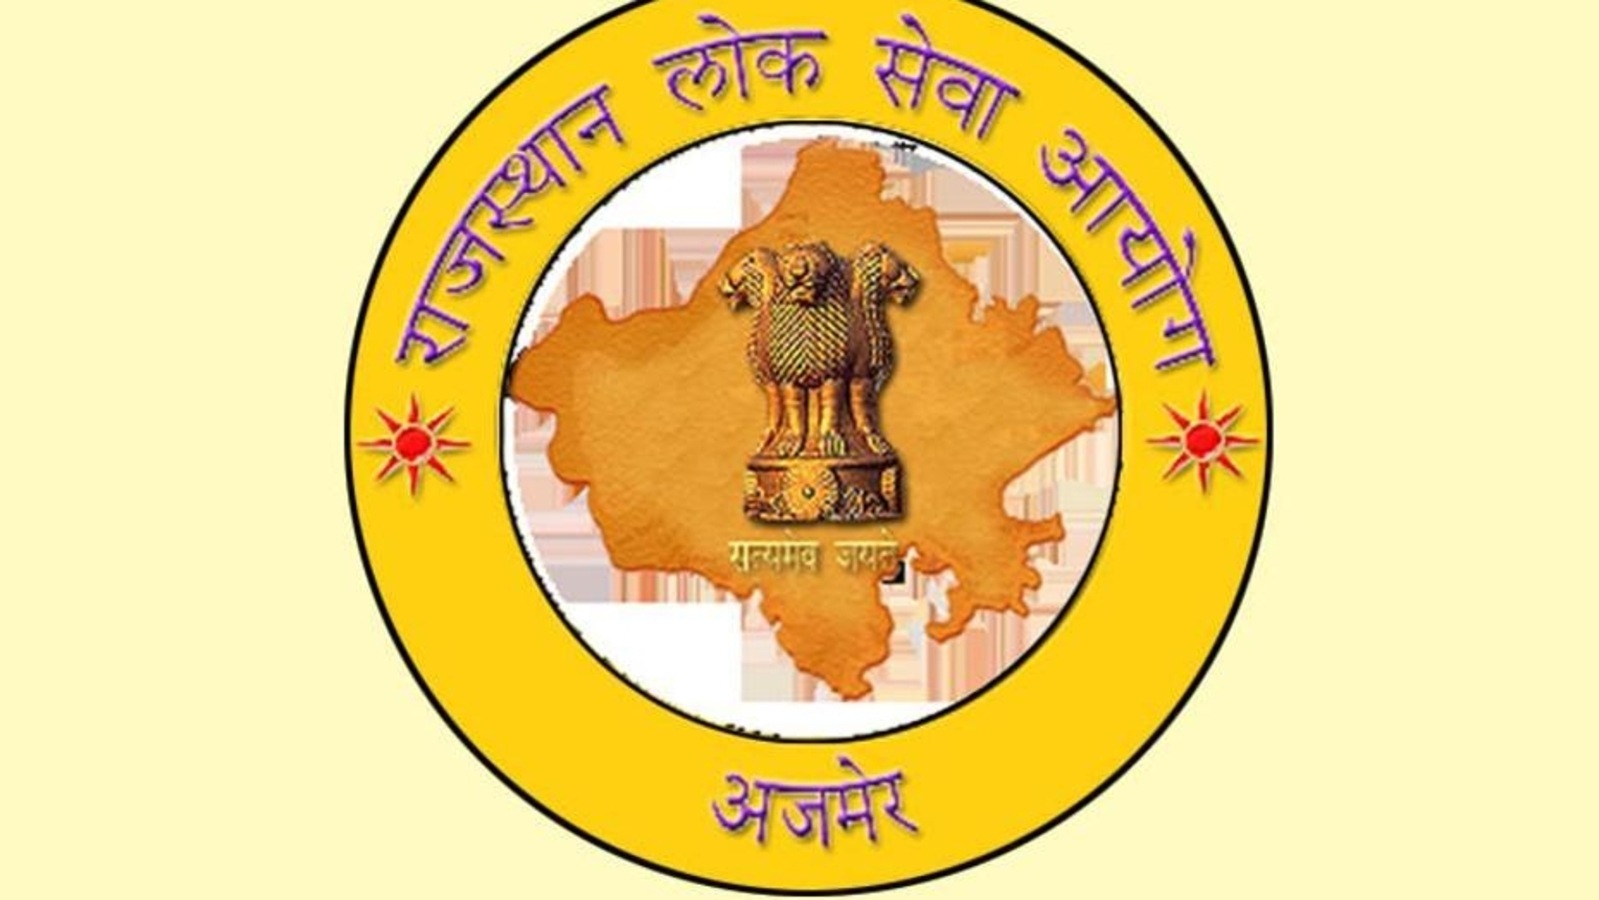 RPSC ACF FRO examination date released at rpsc.rajasthan.gov.in, details here